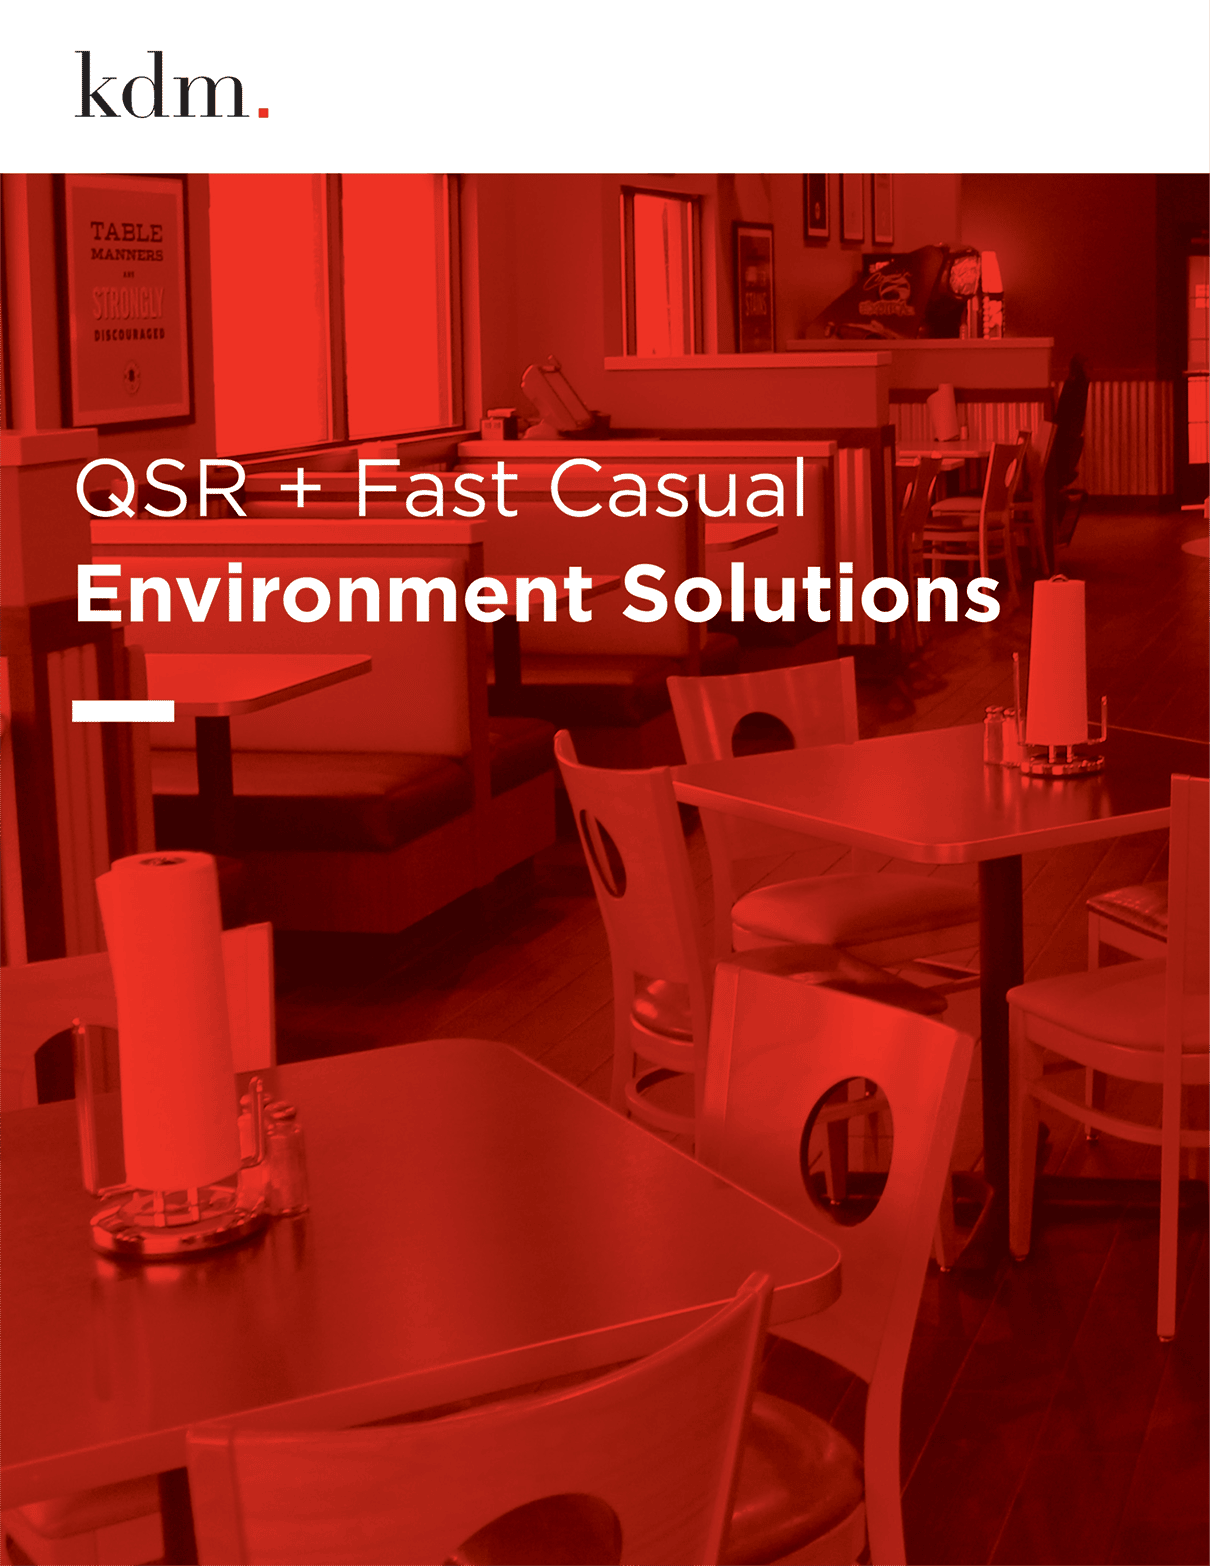 QSR + Fast Casual Environment Solutions Brochure Cover Red Restaurant